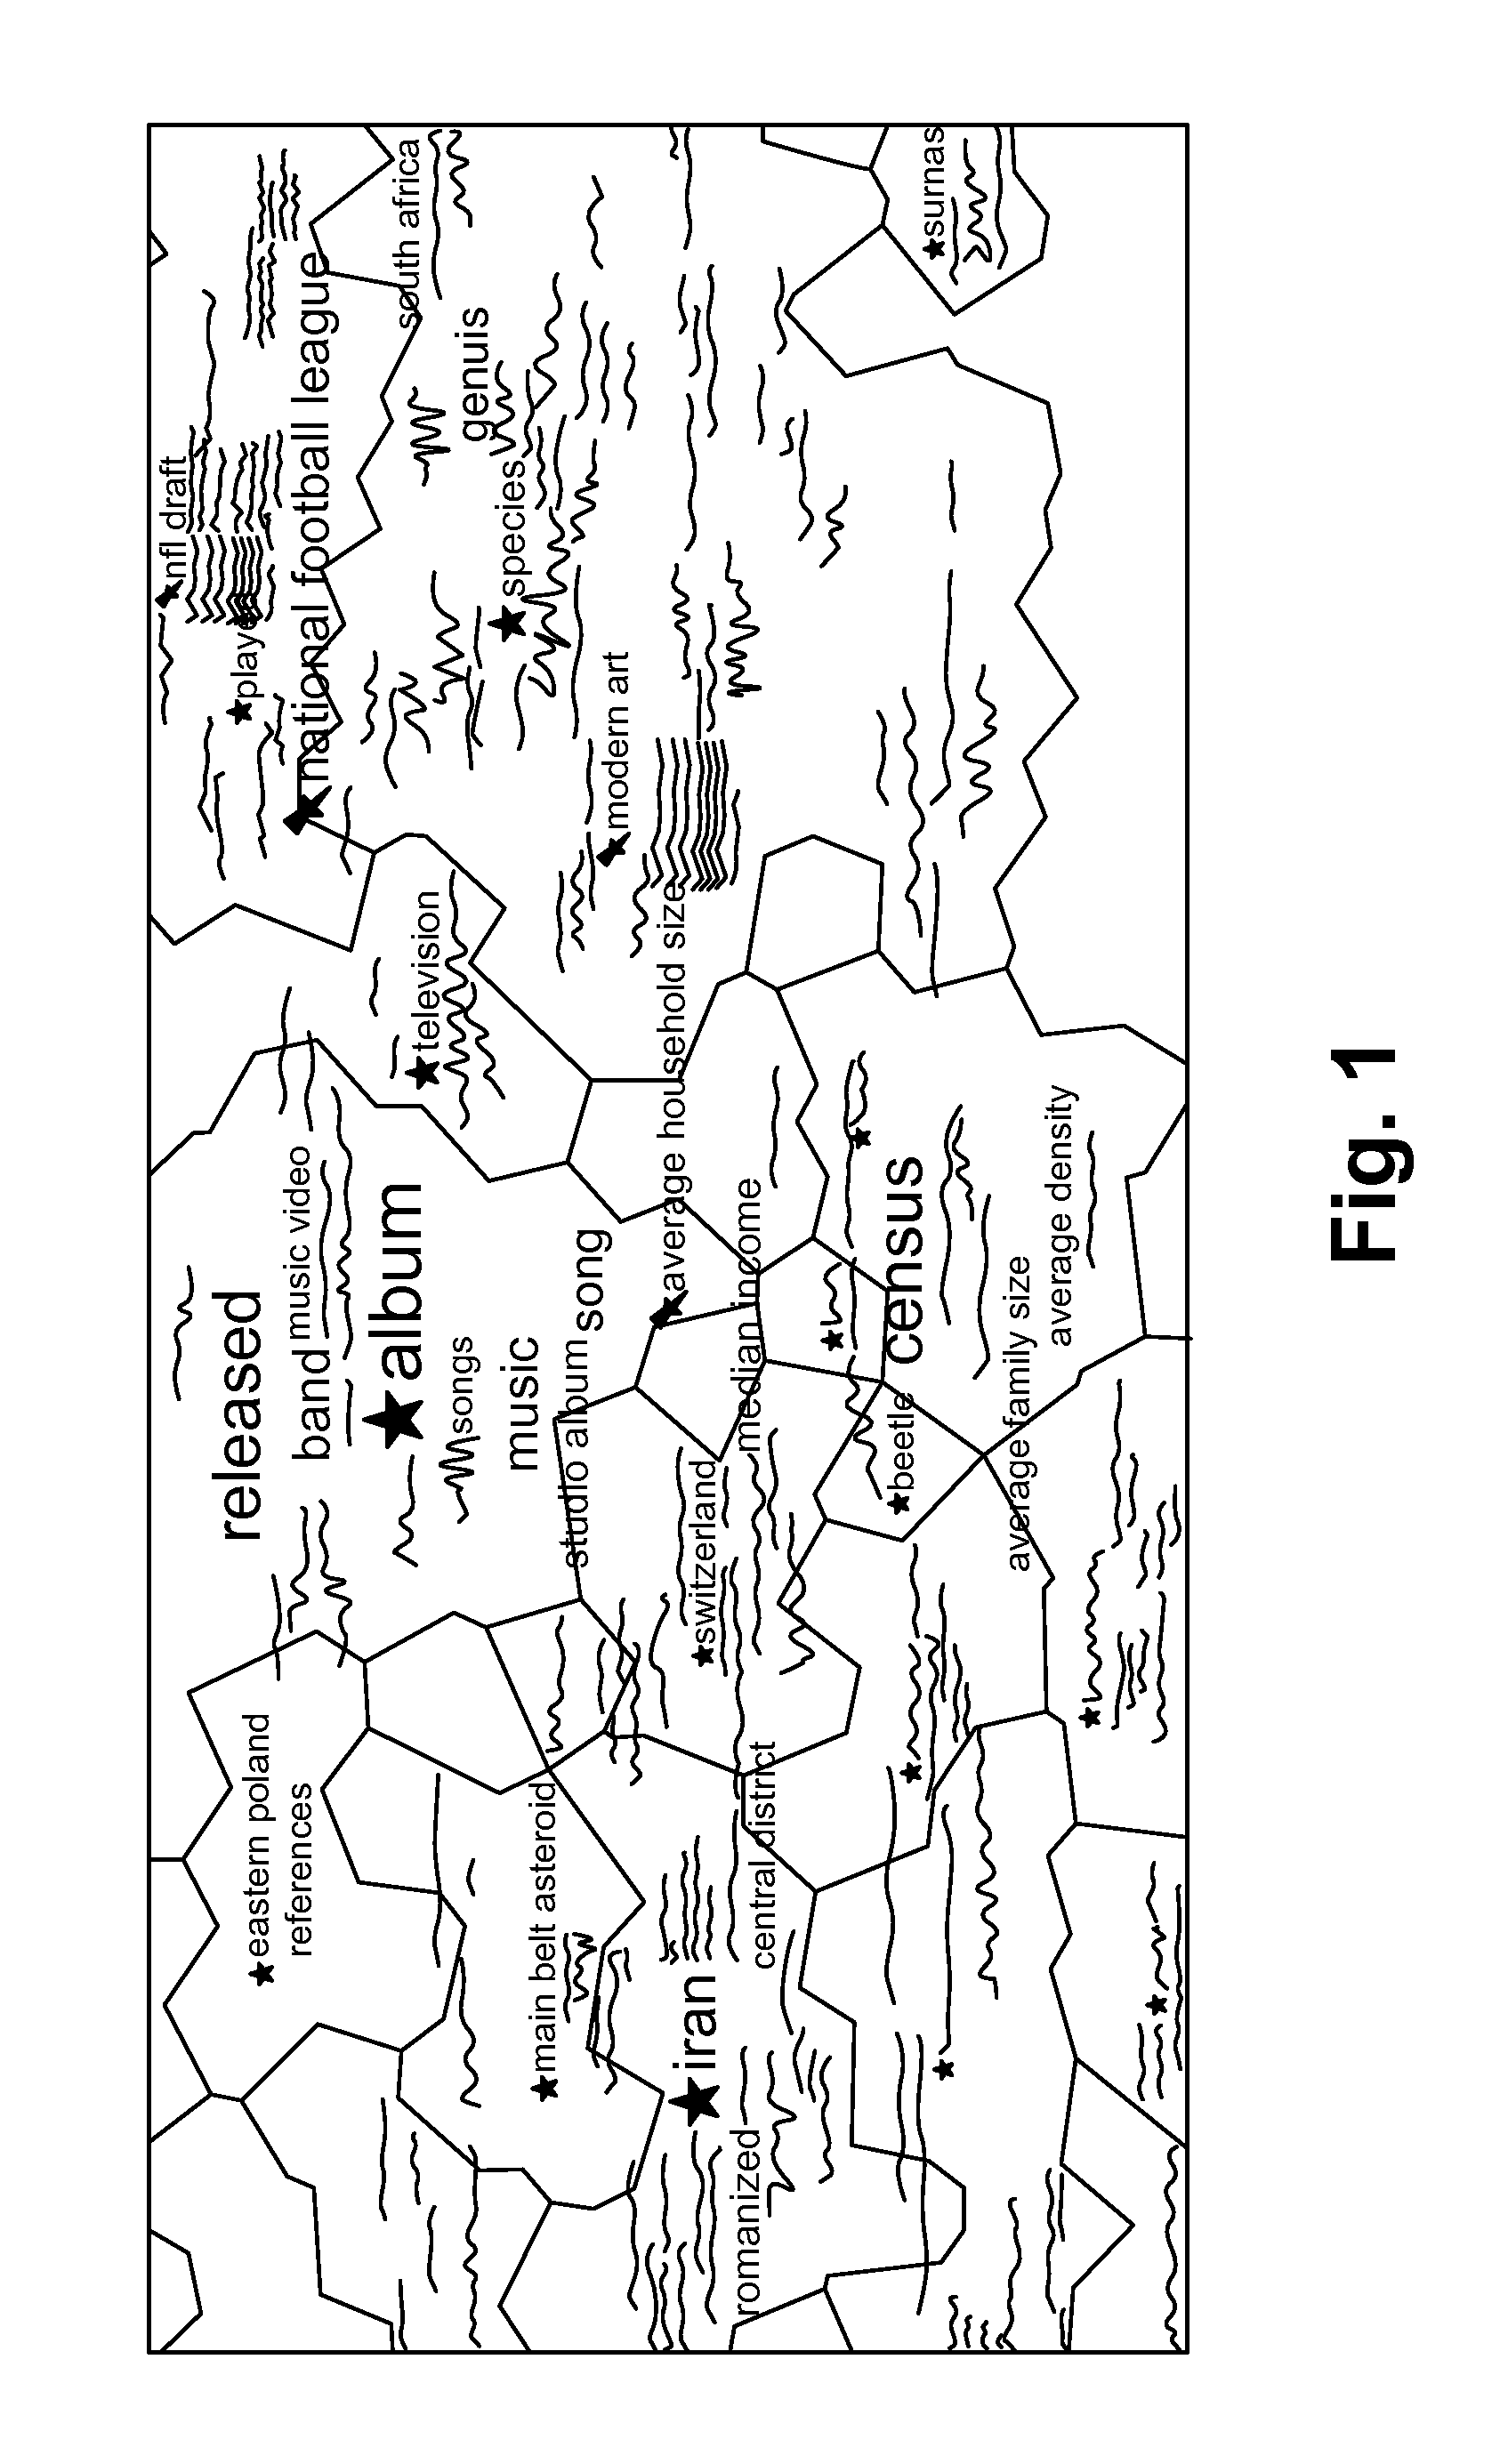 Method and system for information retrieval and aggregation from inferred user reasoning